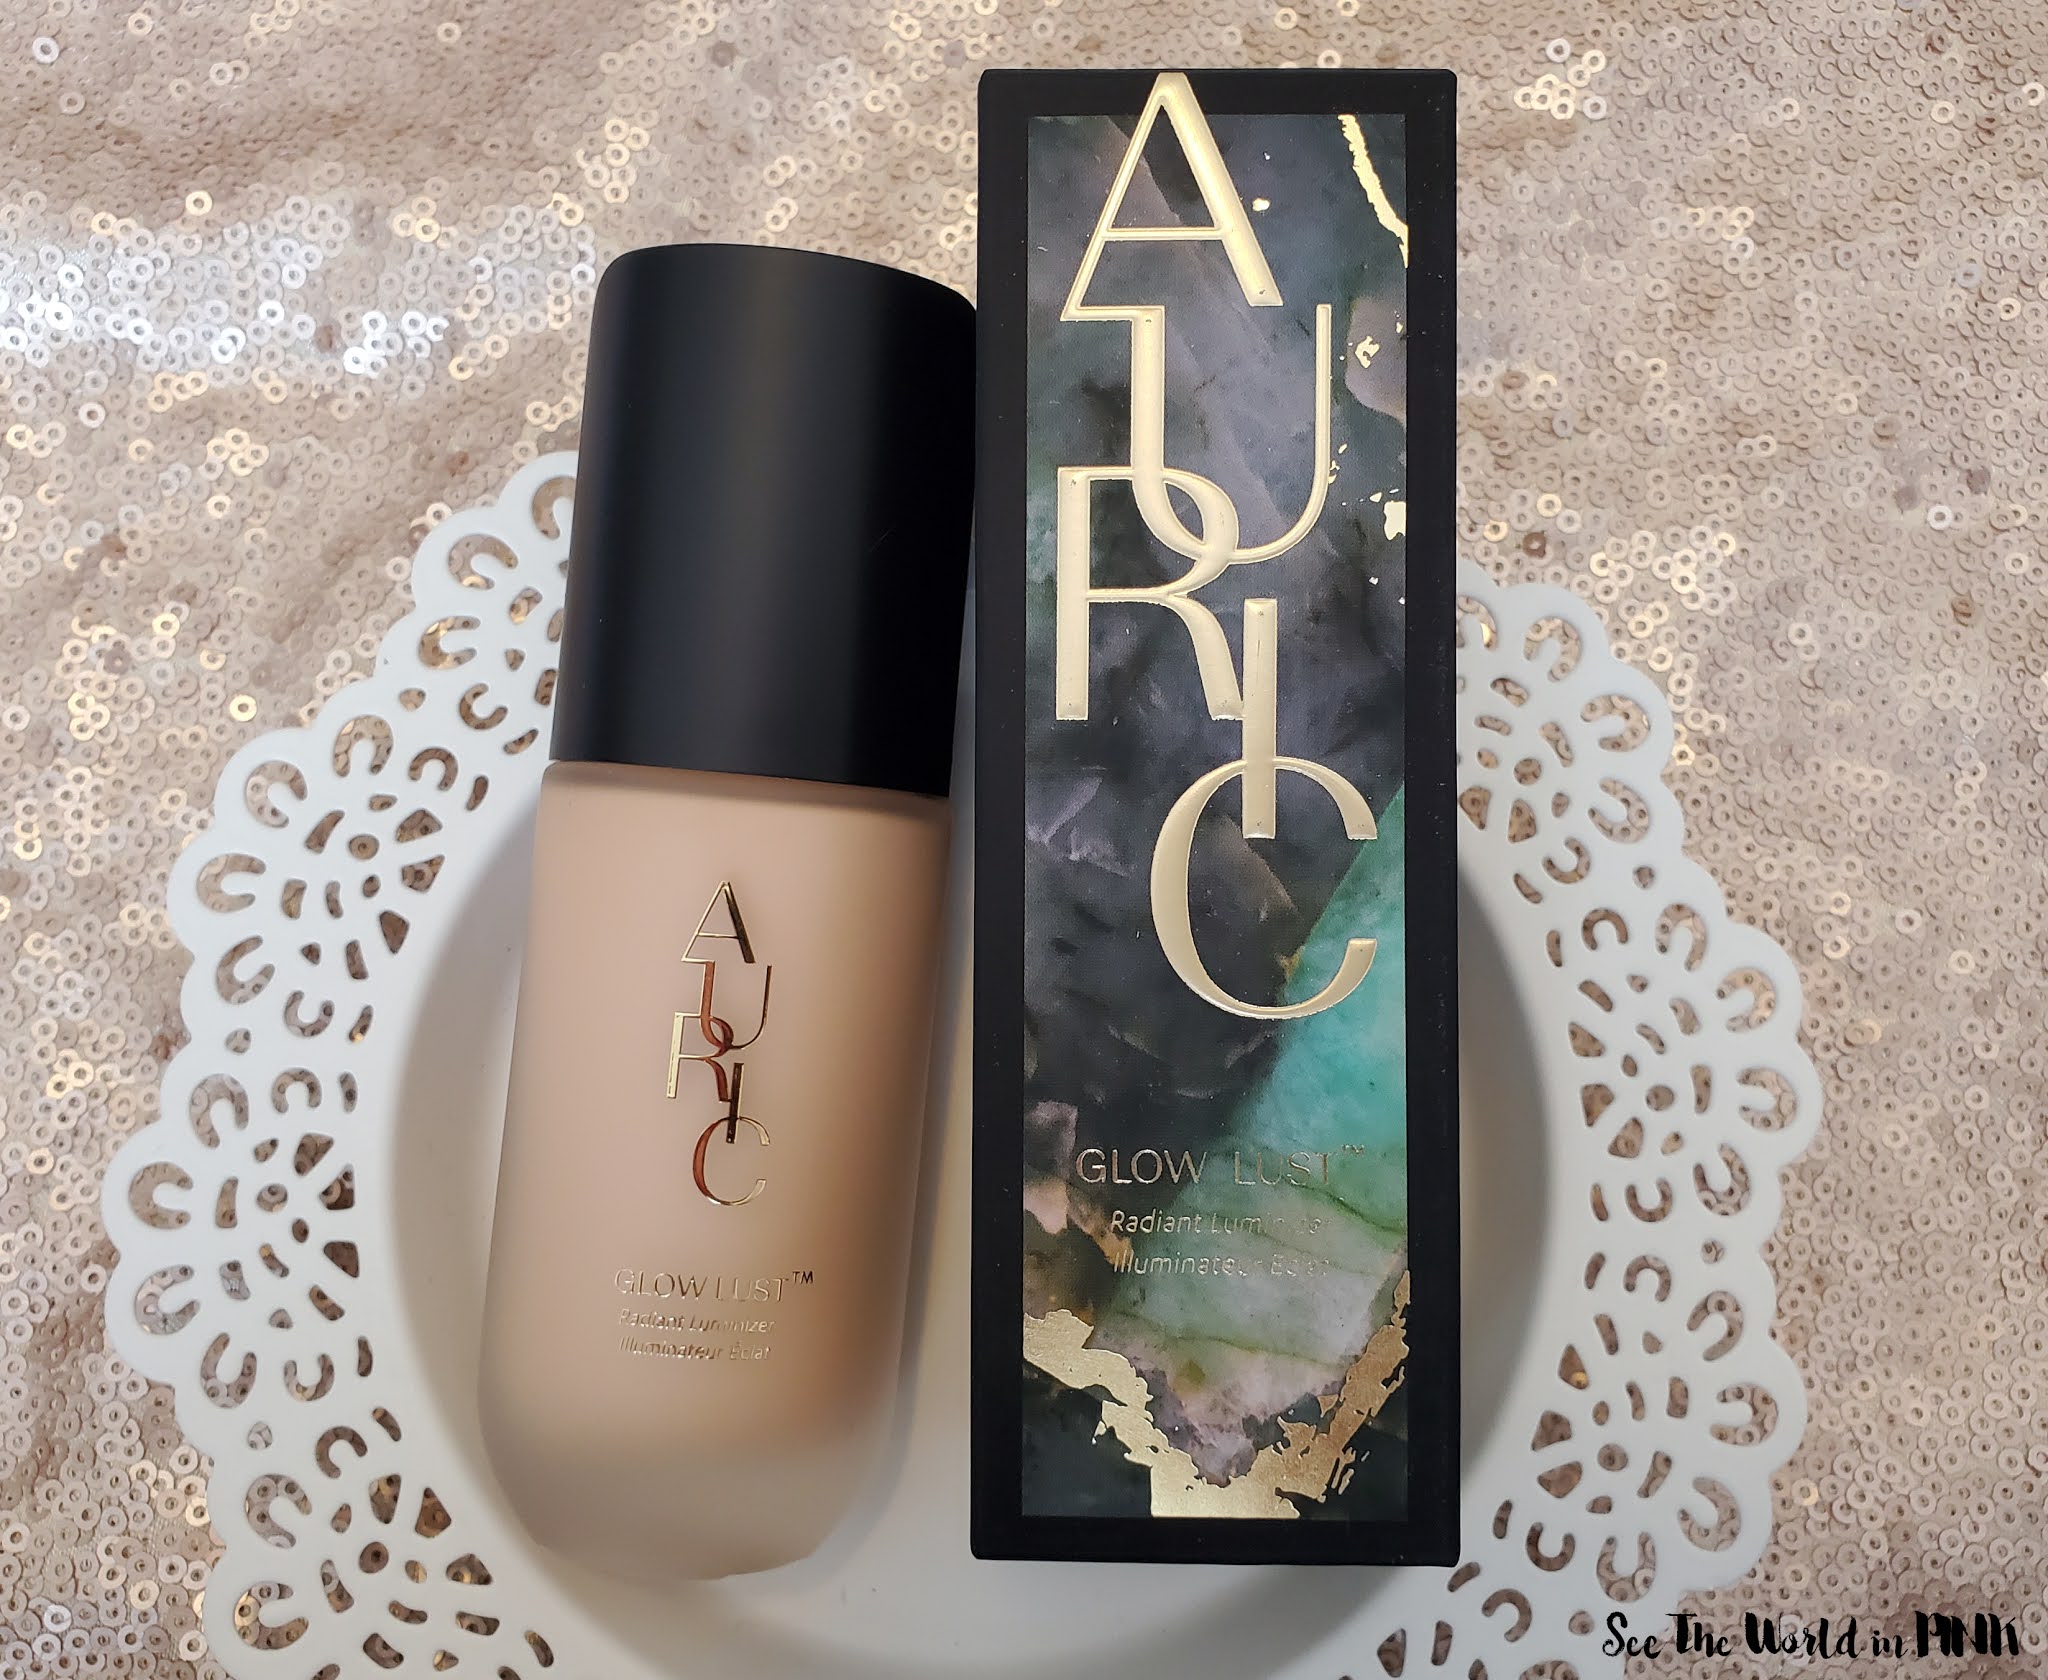 Auric Cosmetics by Samantha Ravndahl - Glow Lust in Selenite and Smoke Reflect in Temper Review and Swatches